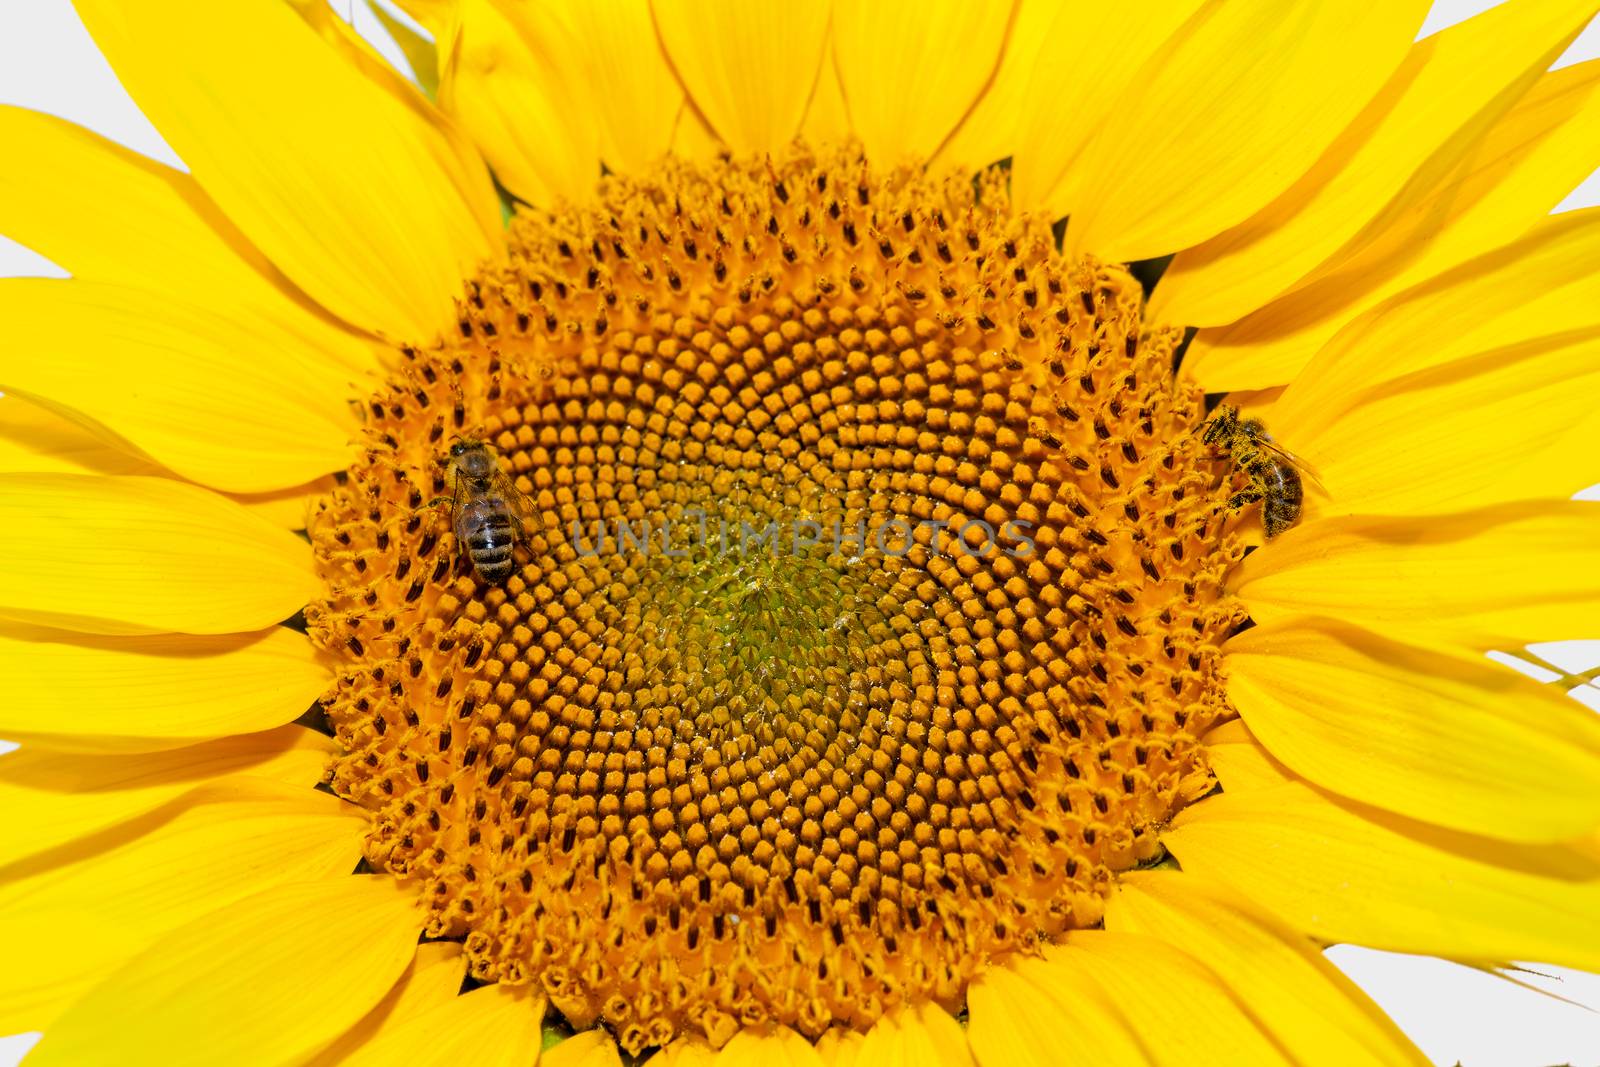 Honey bees on sunflower. Flower of sunflower close-up, natural background.